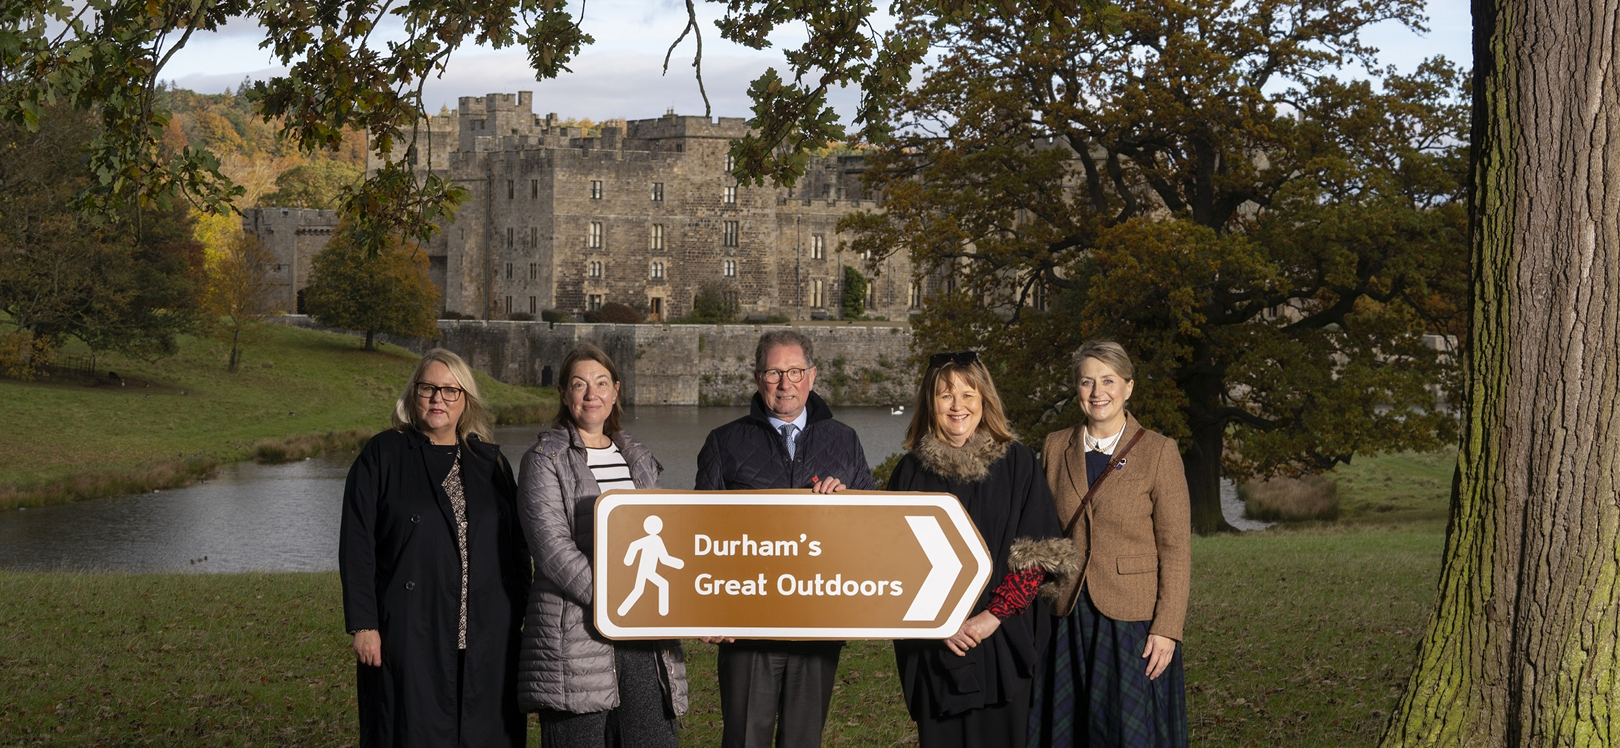 Pictured at Raby Castle, from left, are: Michelle Gorman, managing director of Visit County Durham; Pam Porter, operations and events manager at Locomotion; Edward Perry, chief executive of The Auckland Project; Cllr Elizabeth Scott, Durham County Council’s Cabinet member for economy and partnerships; and Rhiannon Hiles, chief executive of Beamish, The Living Museum of the North.